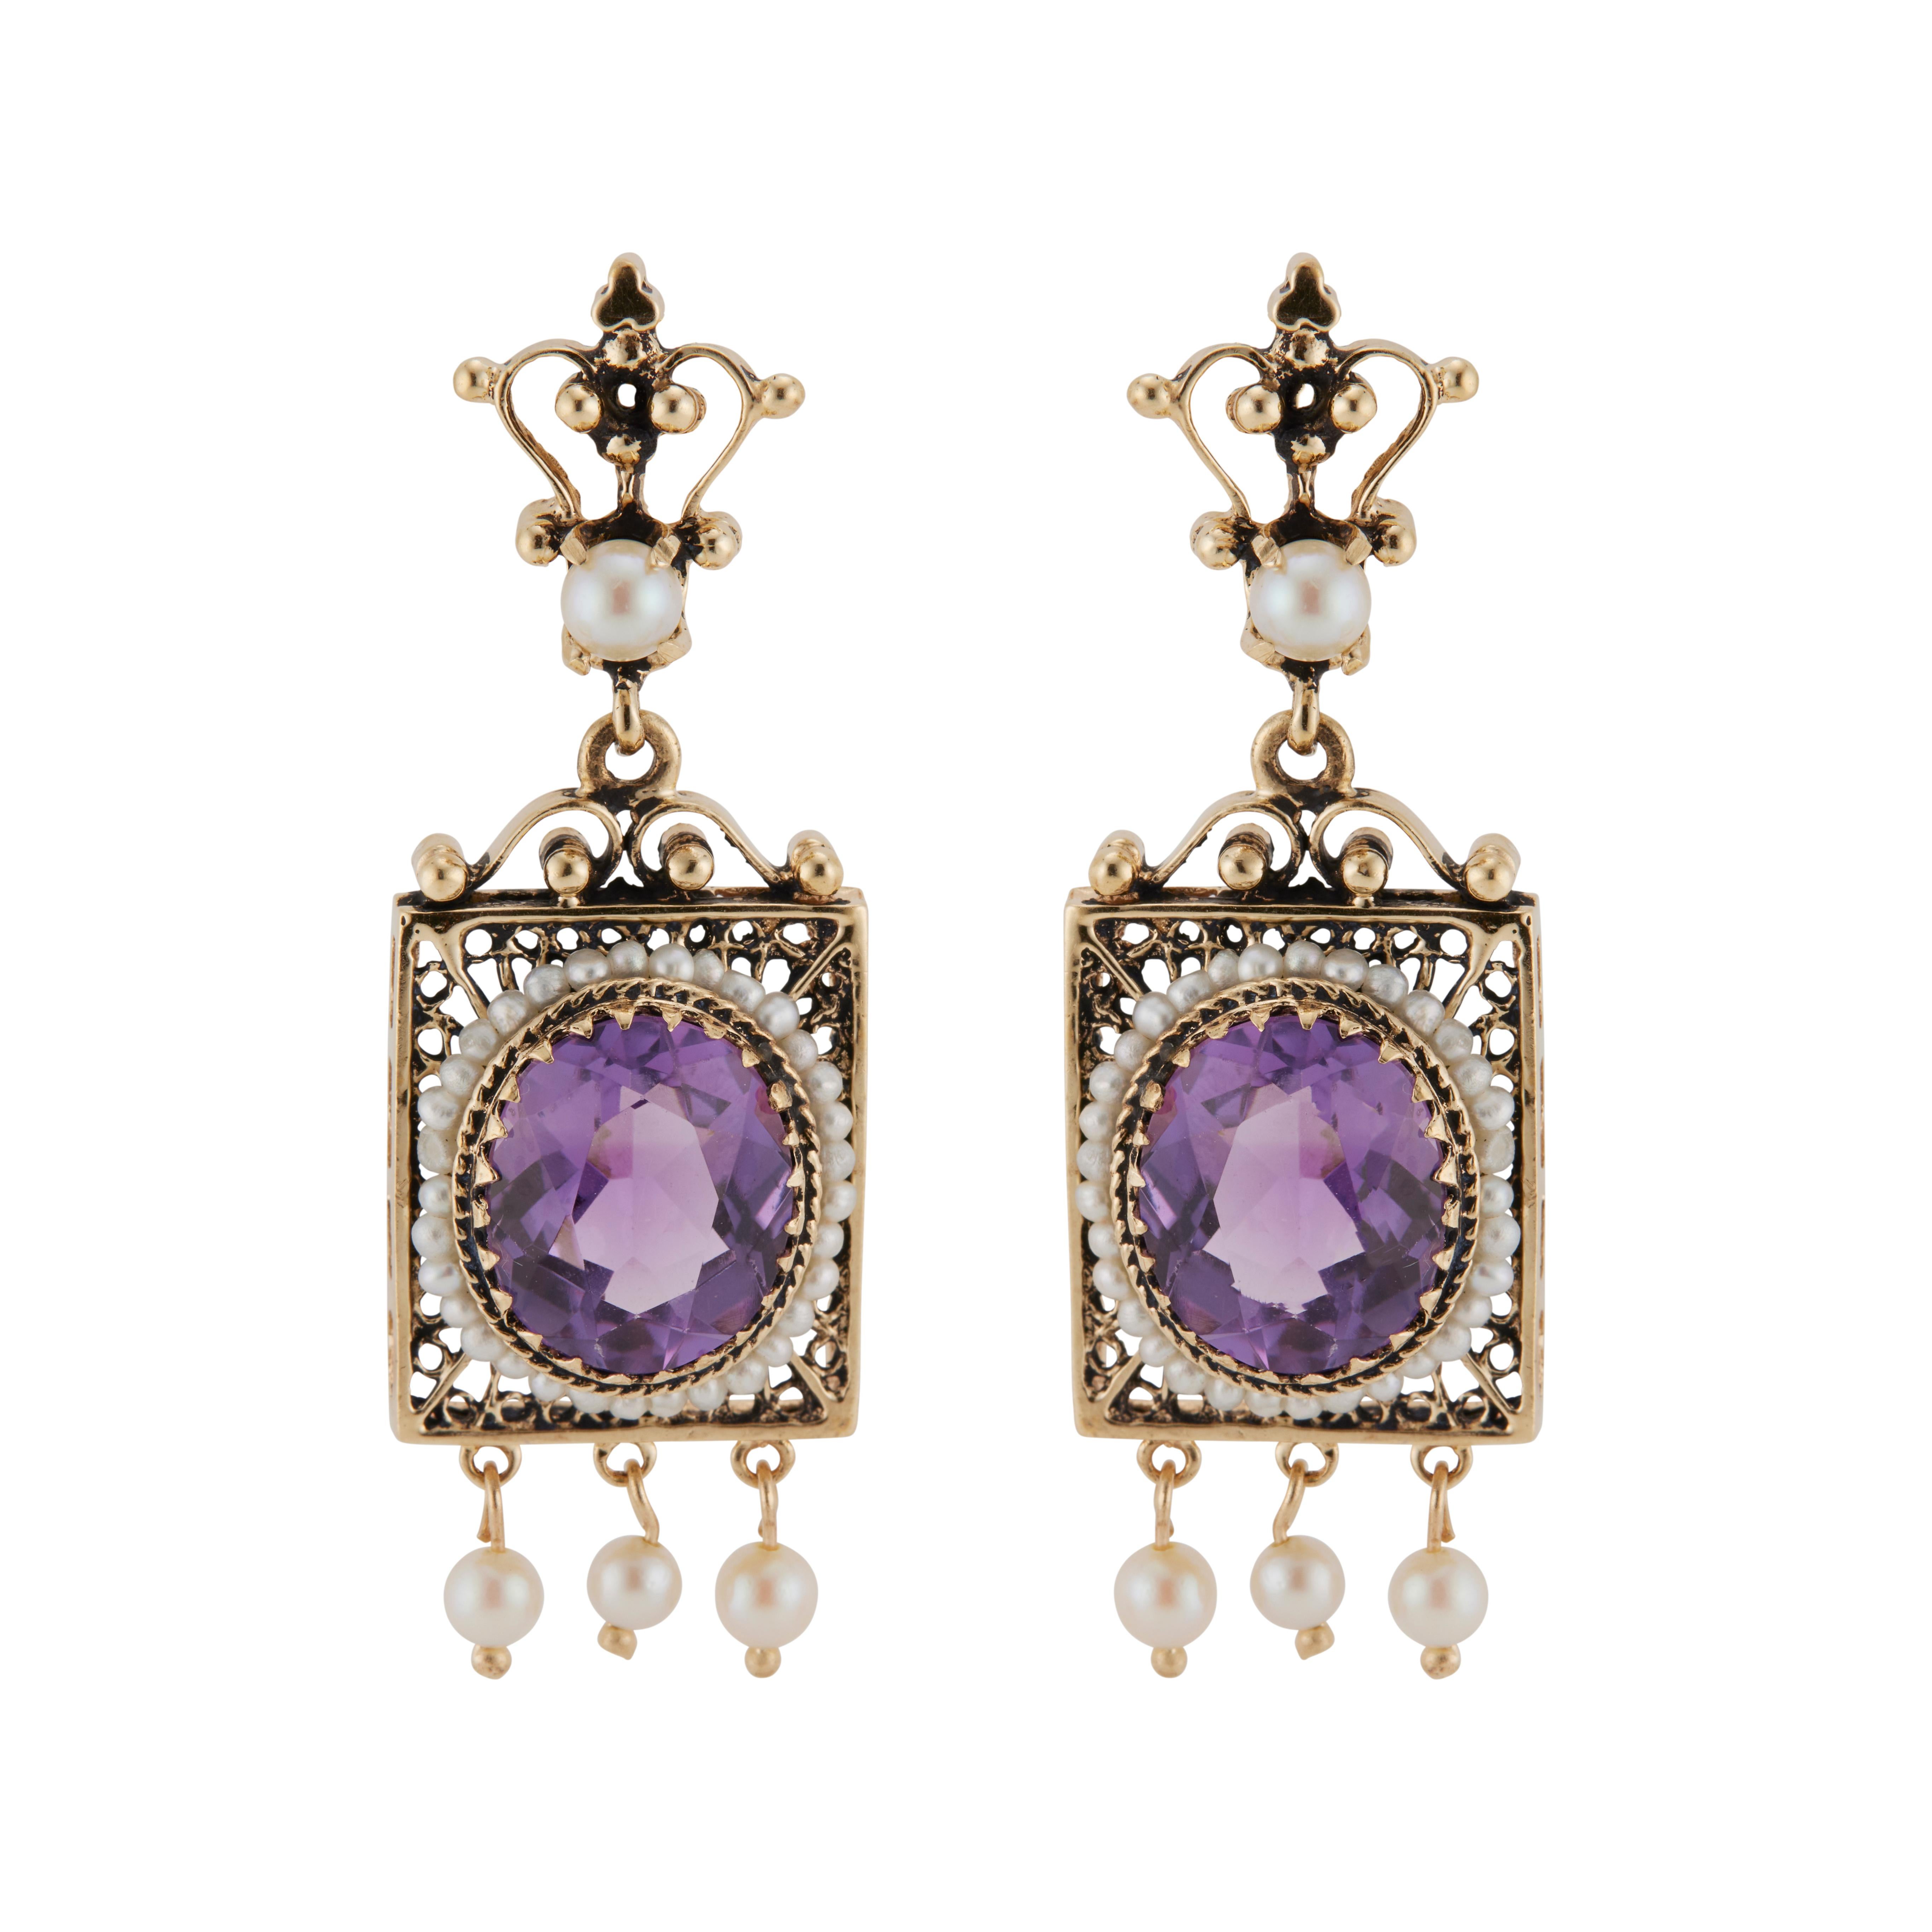 1940's Victorian revival Amethyst and pearl dangle earrings. 2 oval shaped genuine amethysts, each with a halo of pearls set in 14k yellow gold dangle settings accented with 3 pearl dangles on each frame with a pearl above the frame.  
    
12